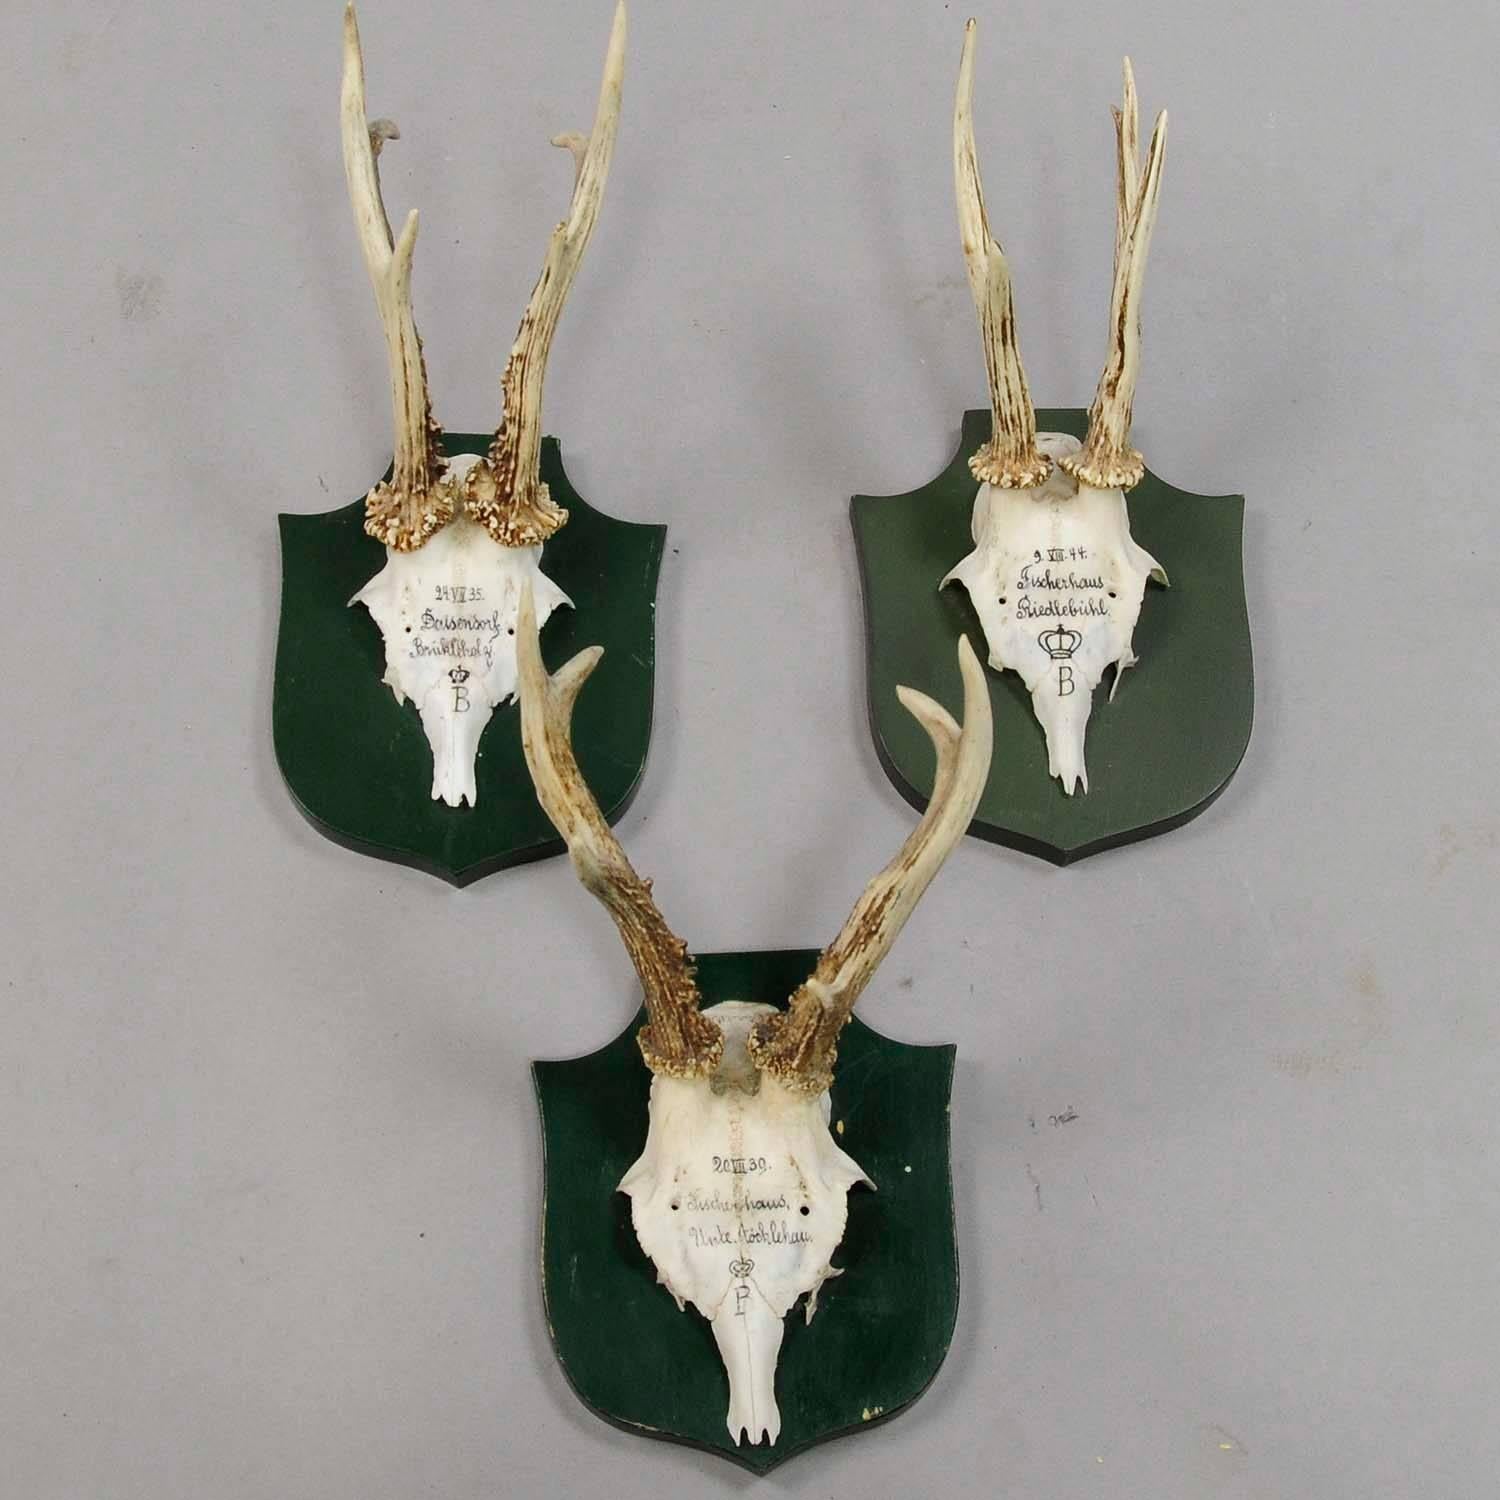 A set of six antique Black Forest deer trophies on wooden plaques. Remaining from the stately home of palace Salem in South Germany. All trophies were shot by members of the family of Margrave Maximilian of Baden. Handwritten inscriptions on the